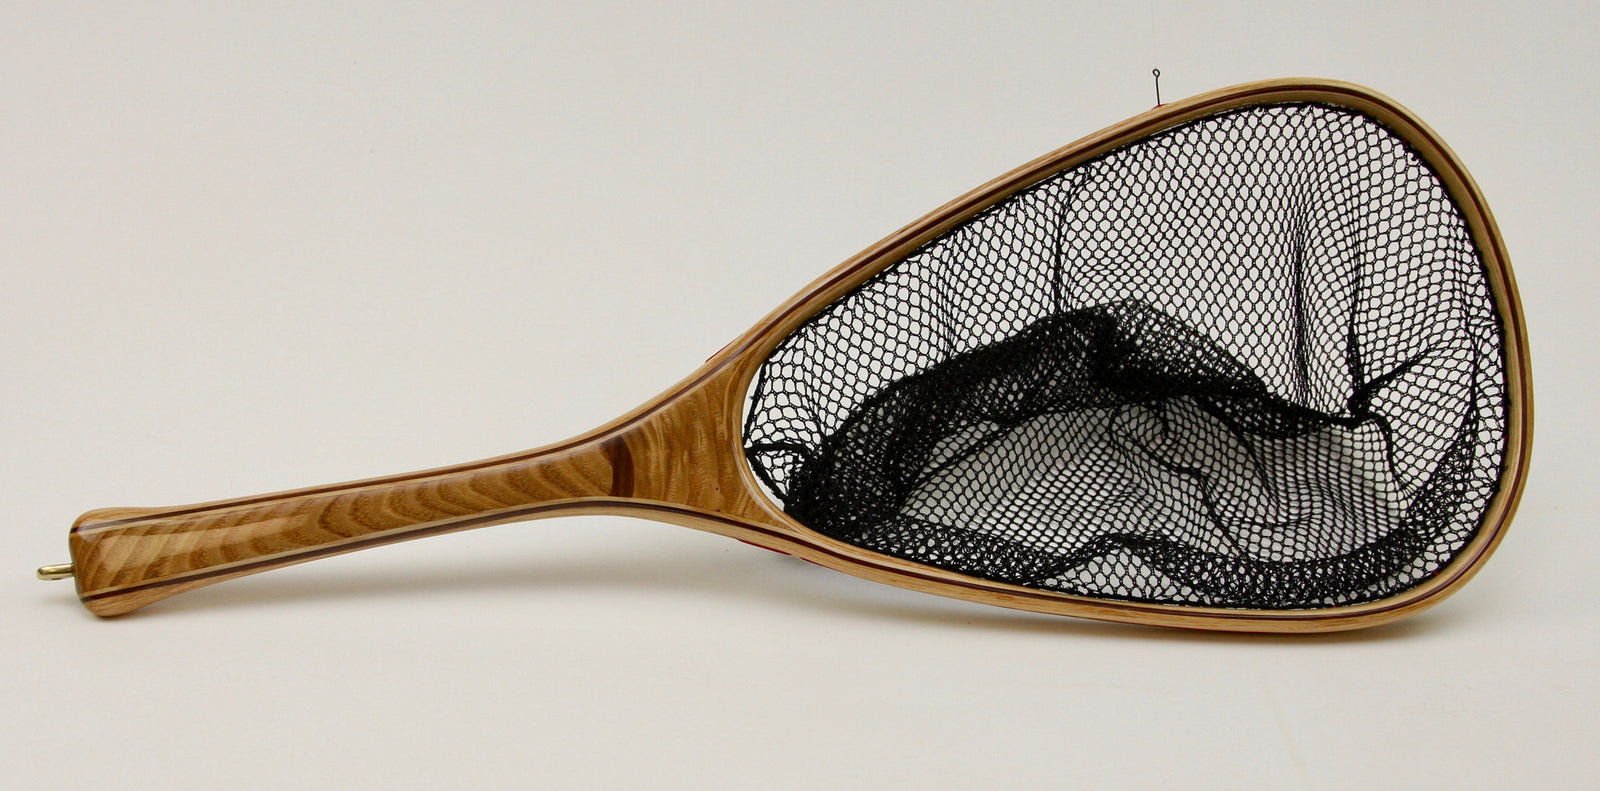 Landing Net Styles and Stories - Nets that Honor the Fish